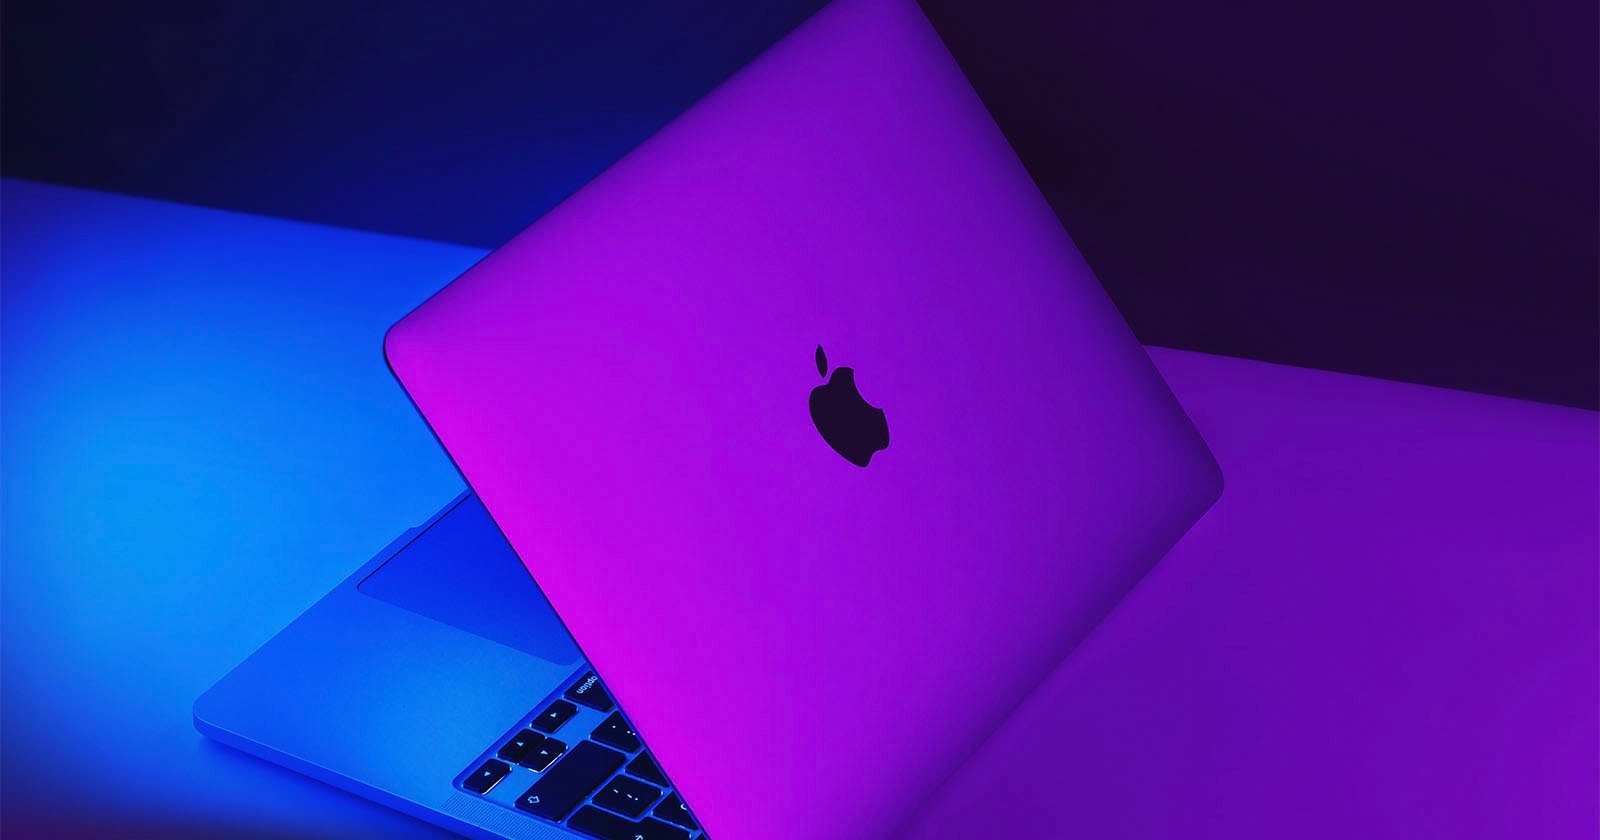 A photo shows a MacBook illuminated by purple lighting.